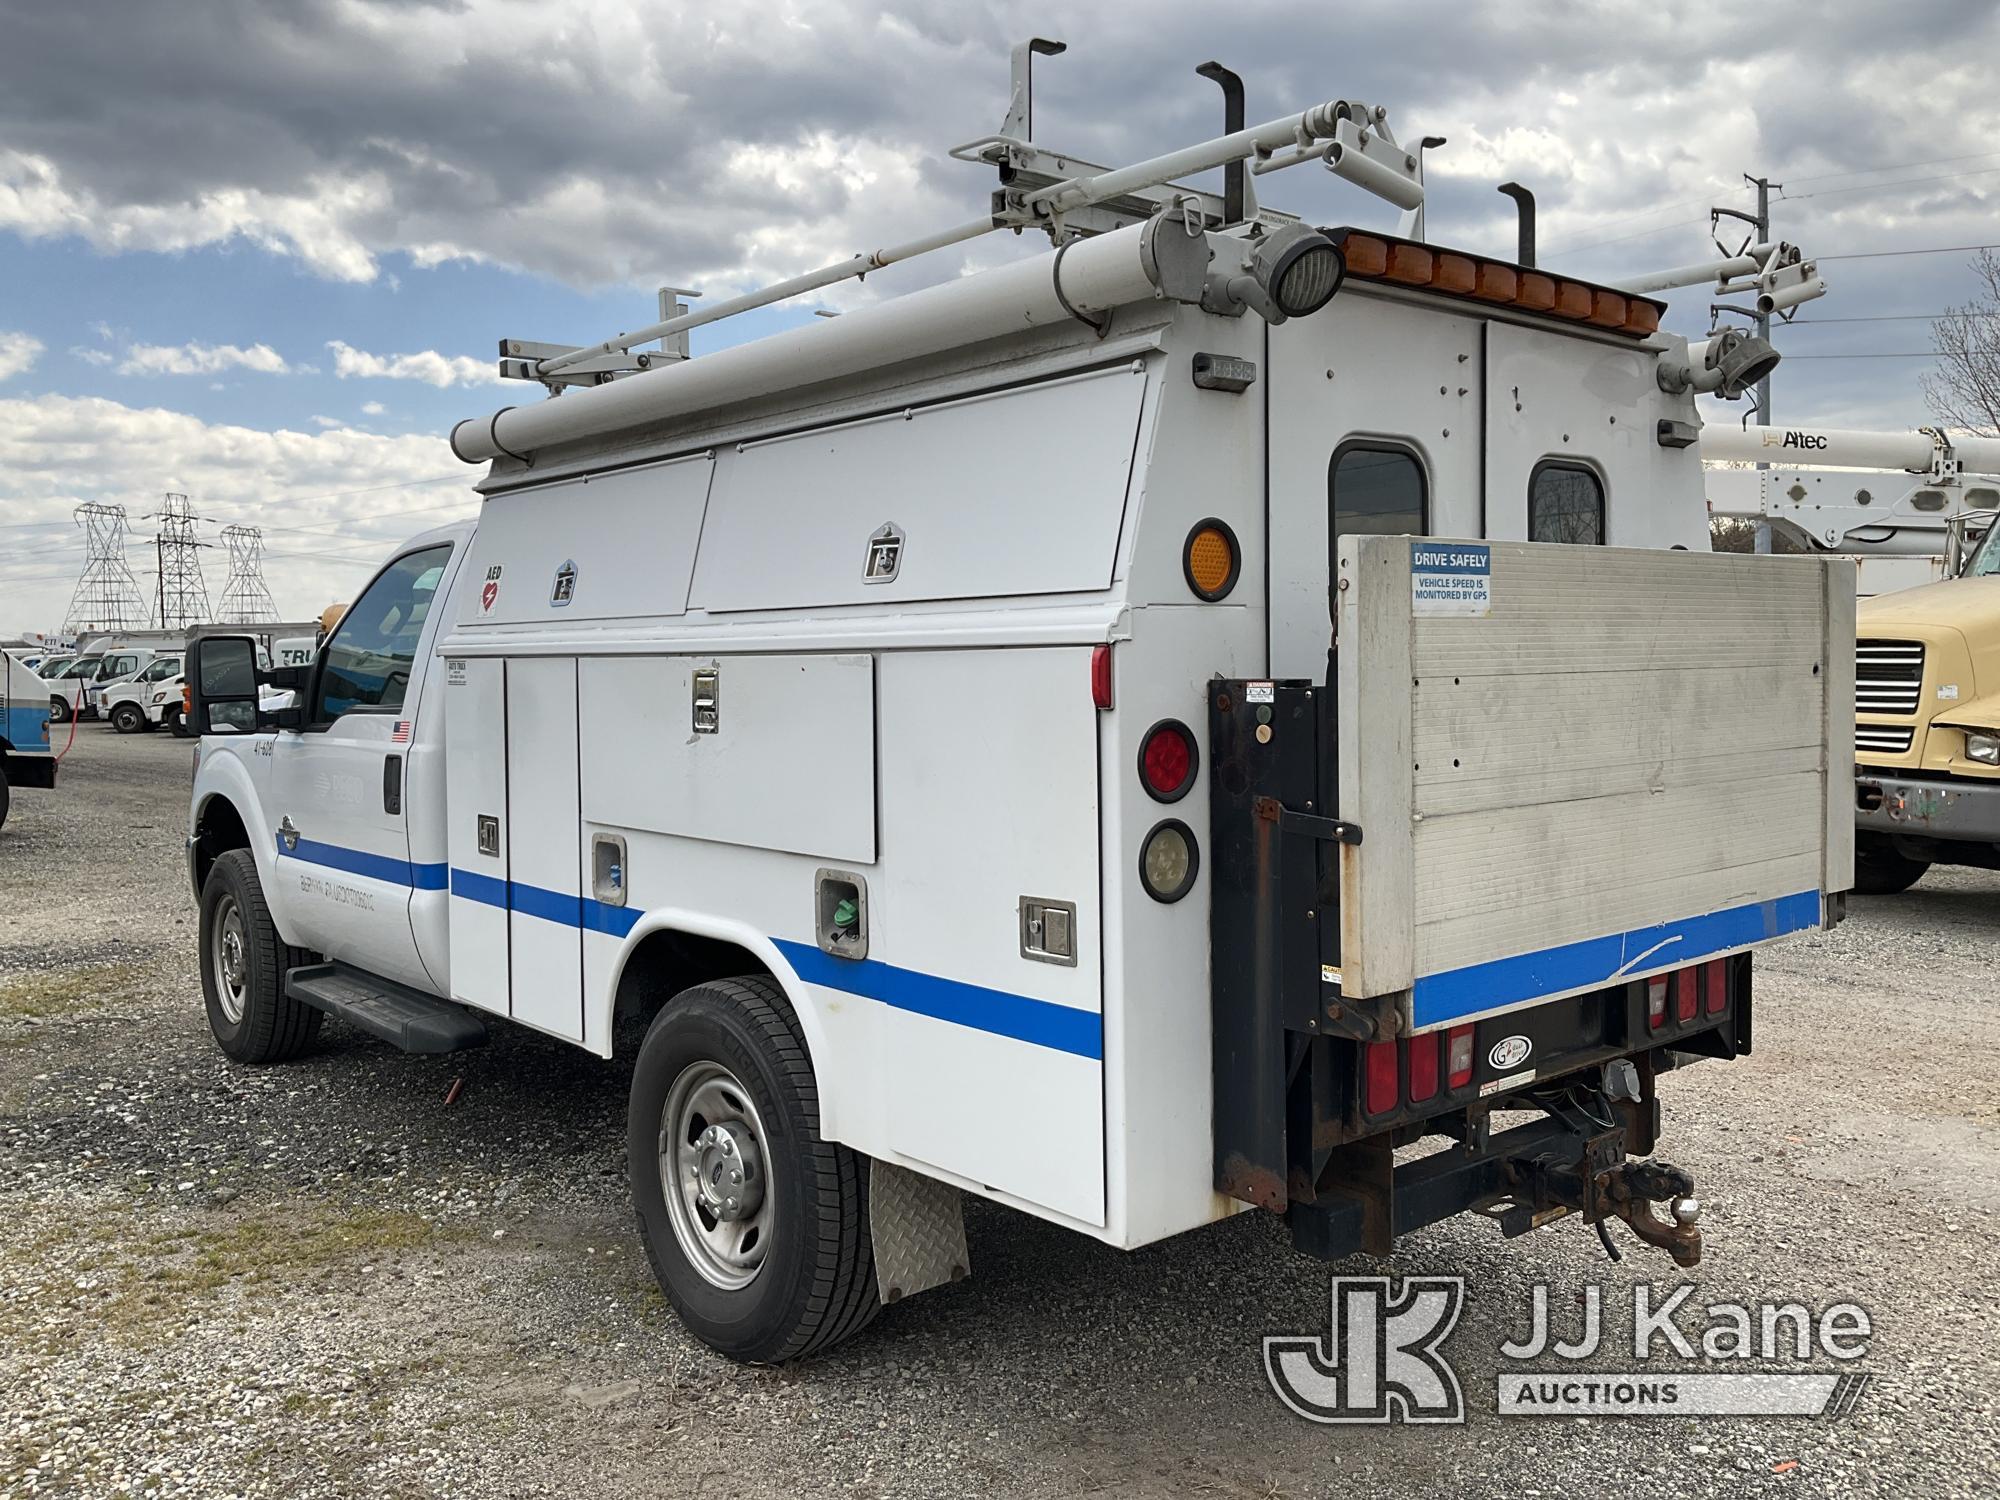 (Plymouth Meeting, PA) 2012 Ford F350 4x4 Enclosed Service Truck Runs & Moves, Body & Rust Damage, L